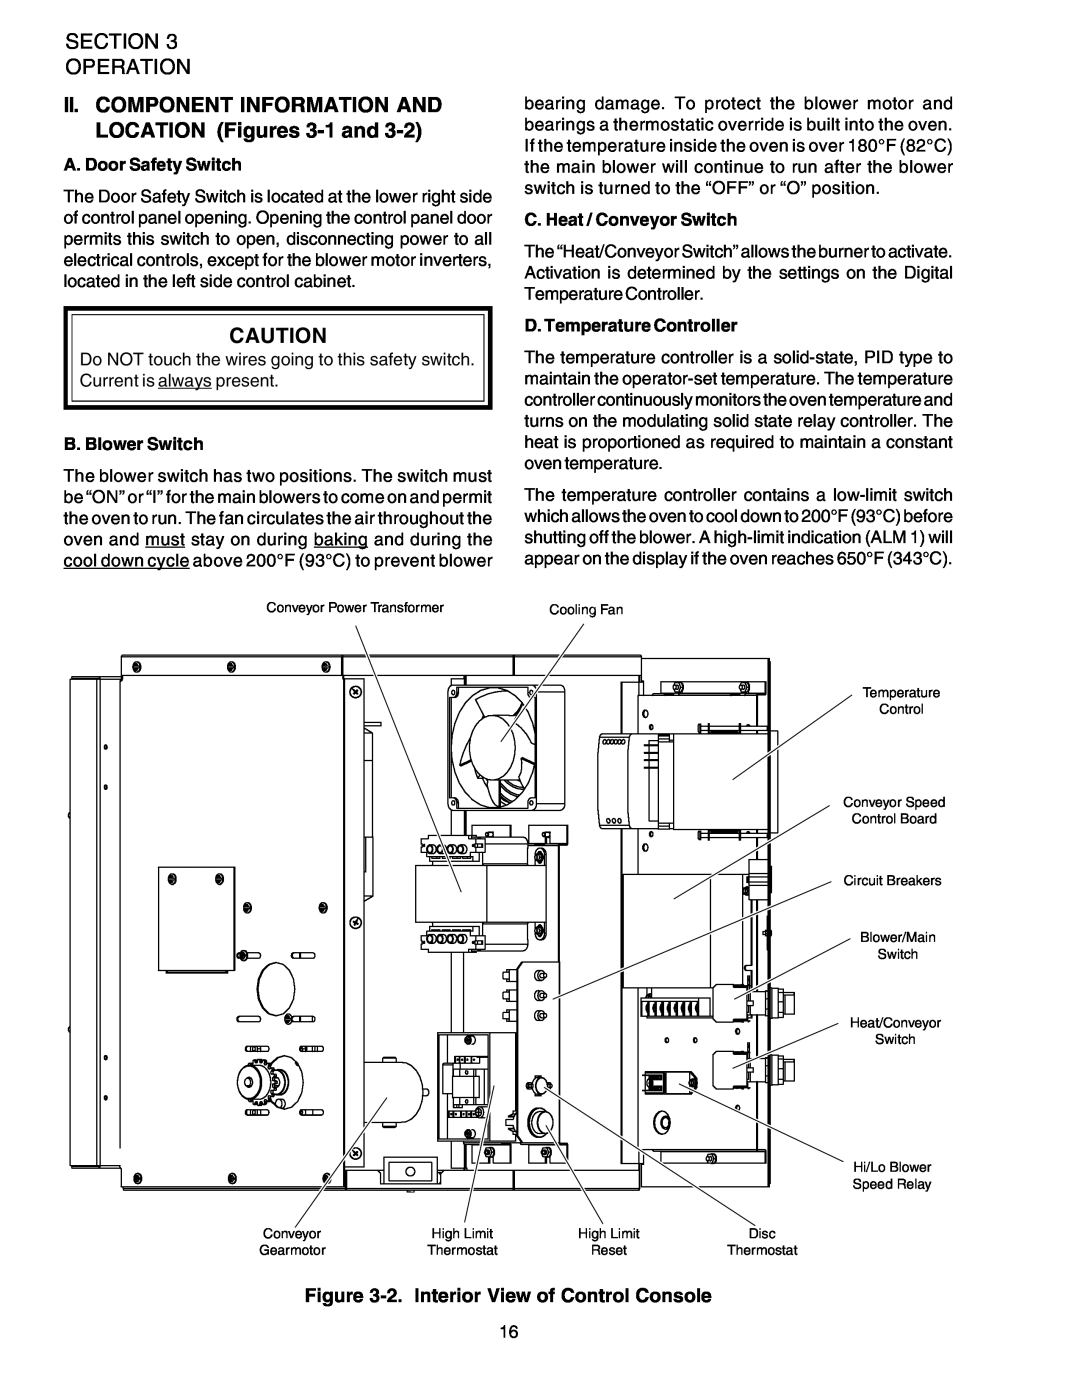 Middleby Marshall PS724E II. COMPONENT INFORMATION AND LOCATION Figures 3-1 and, Section Operation, A. Door Safety Switch 